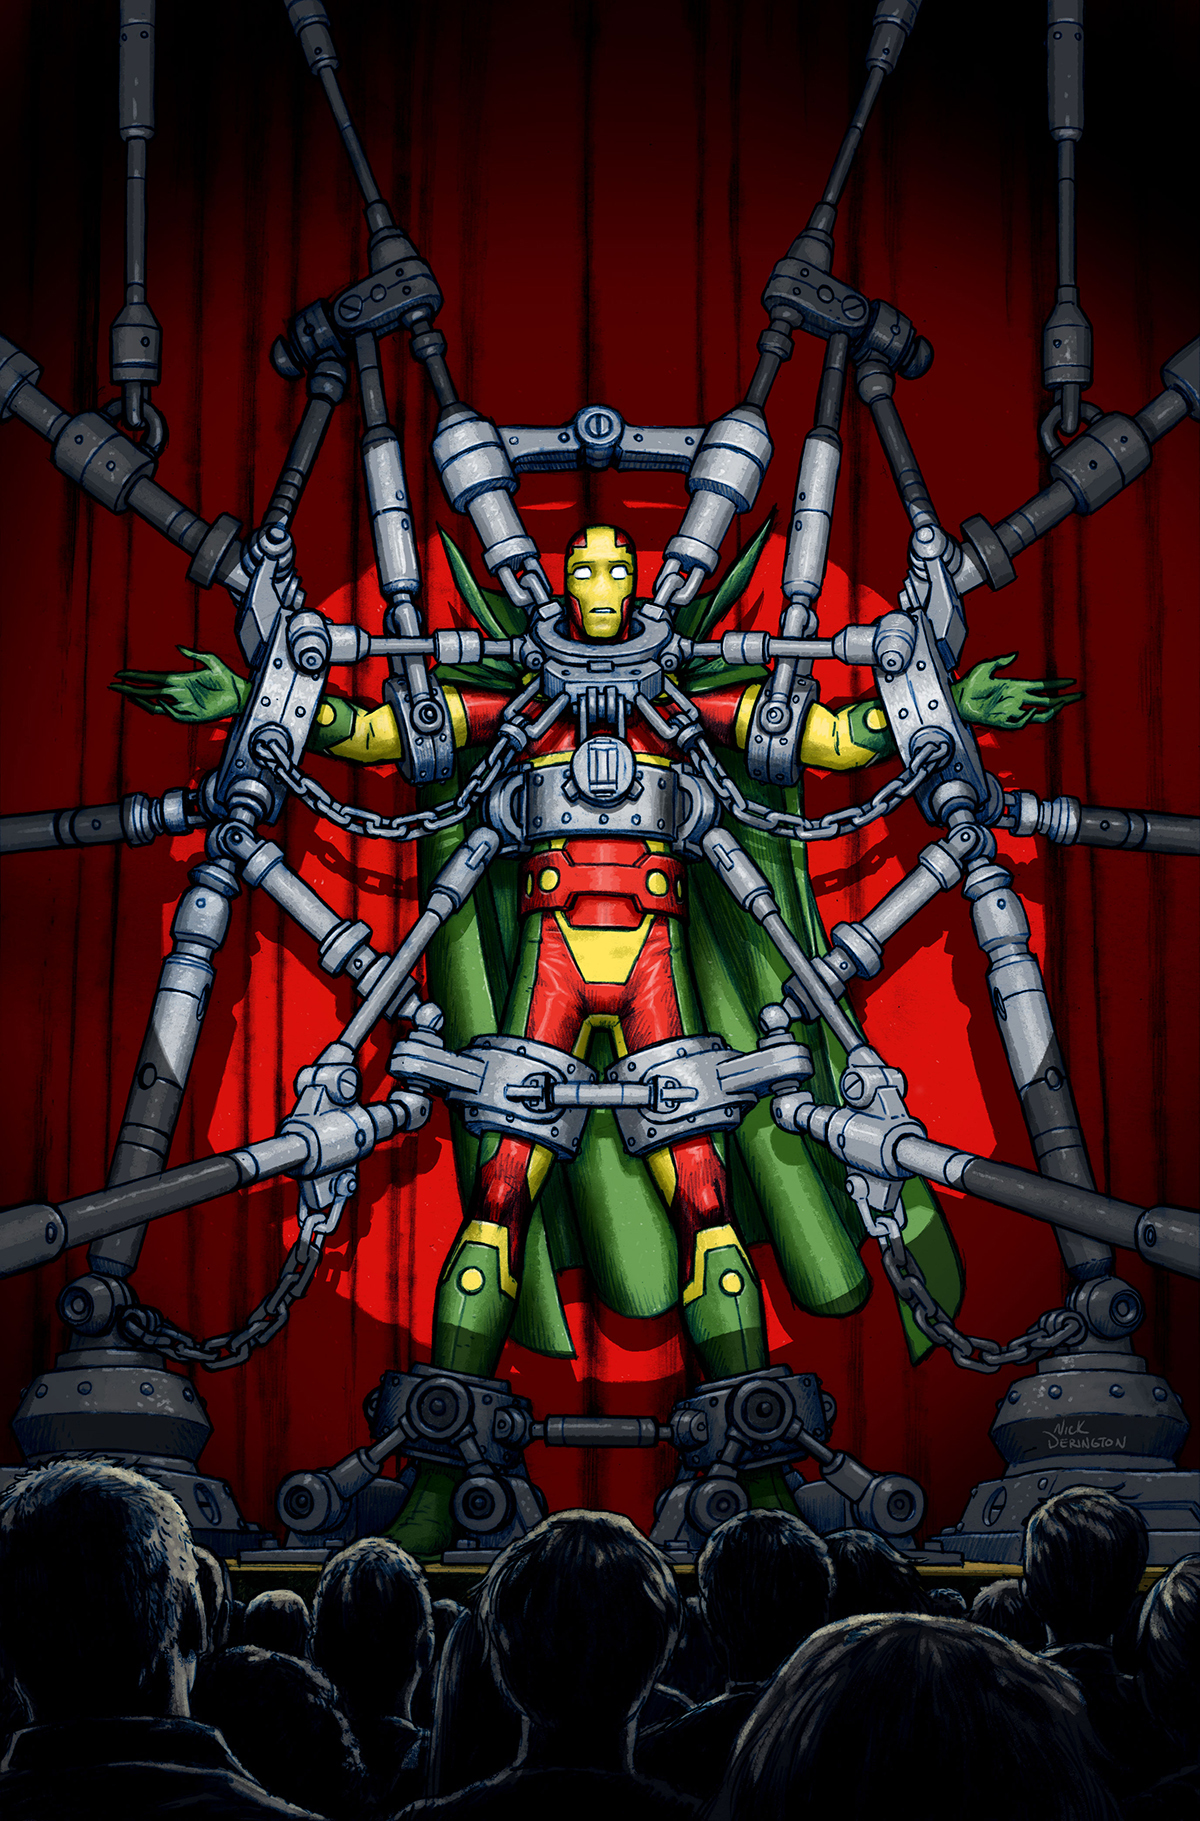 mister-miracle-1-covehlky0.jpg